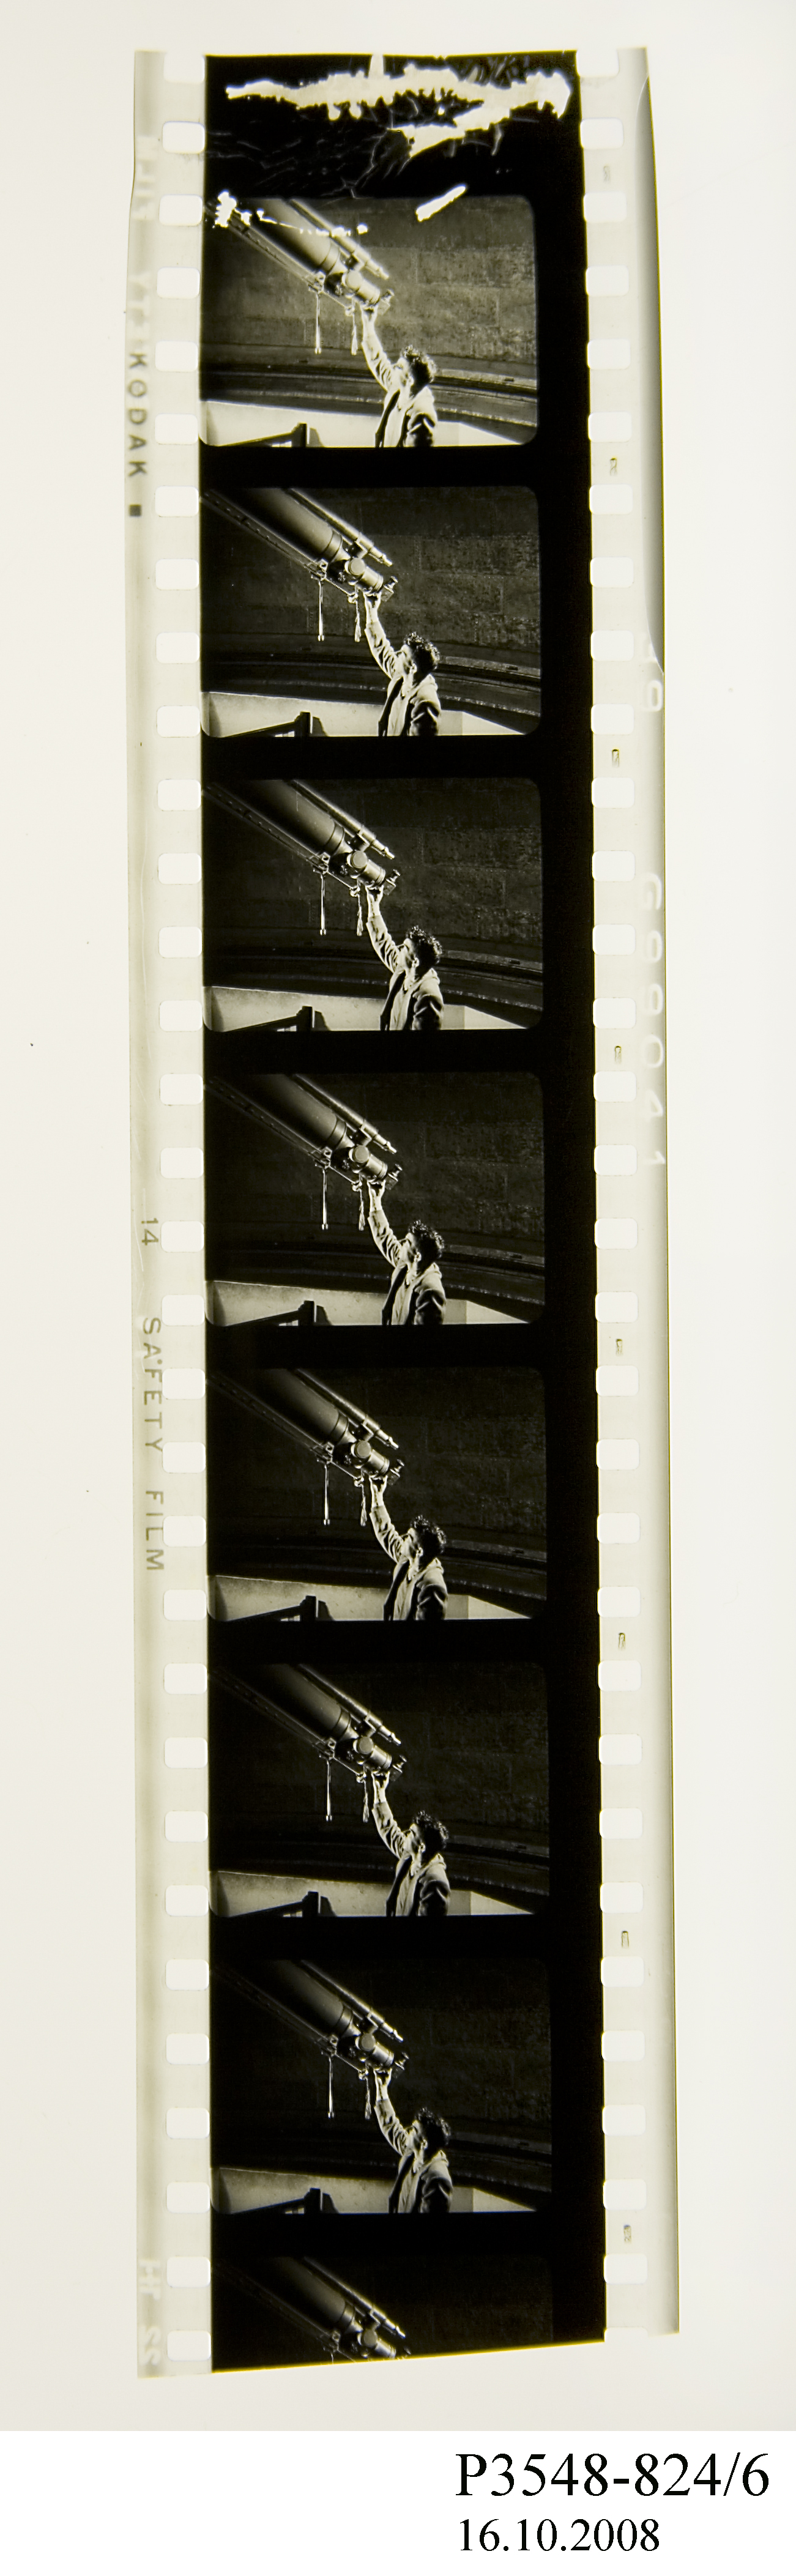 Strip of film showing a man adjusting a telescope